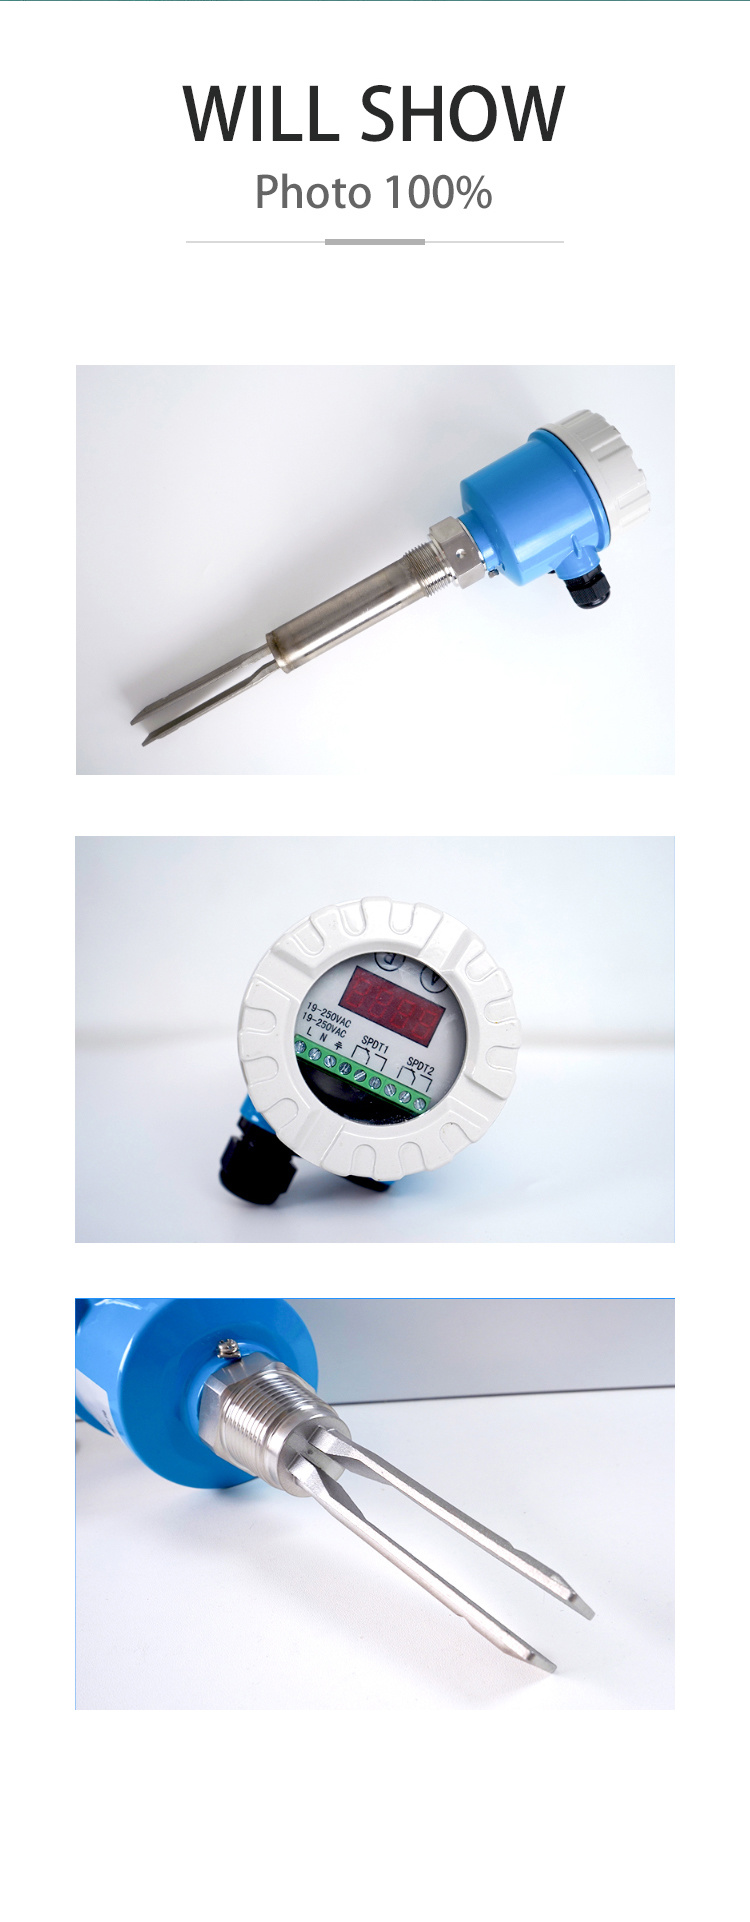 Anti-Corrosion Explosion-Proof Tuning Fork Liquid Fuel Tank Level Switch